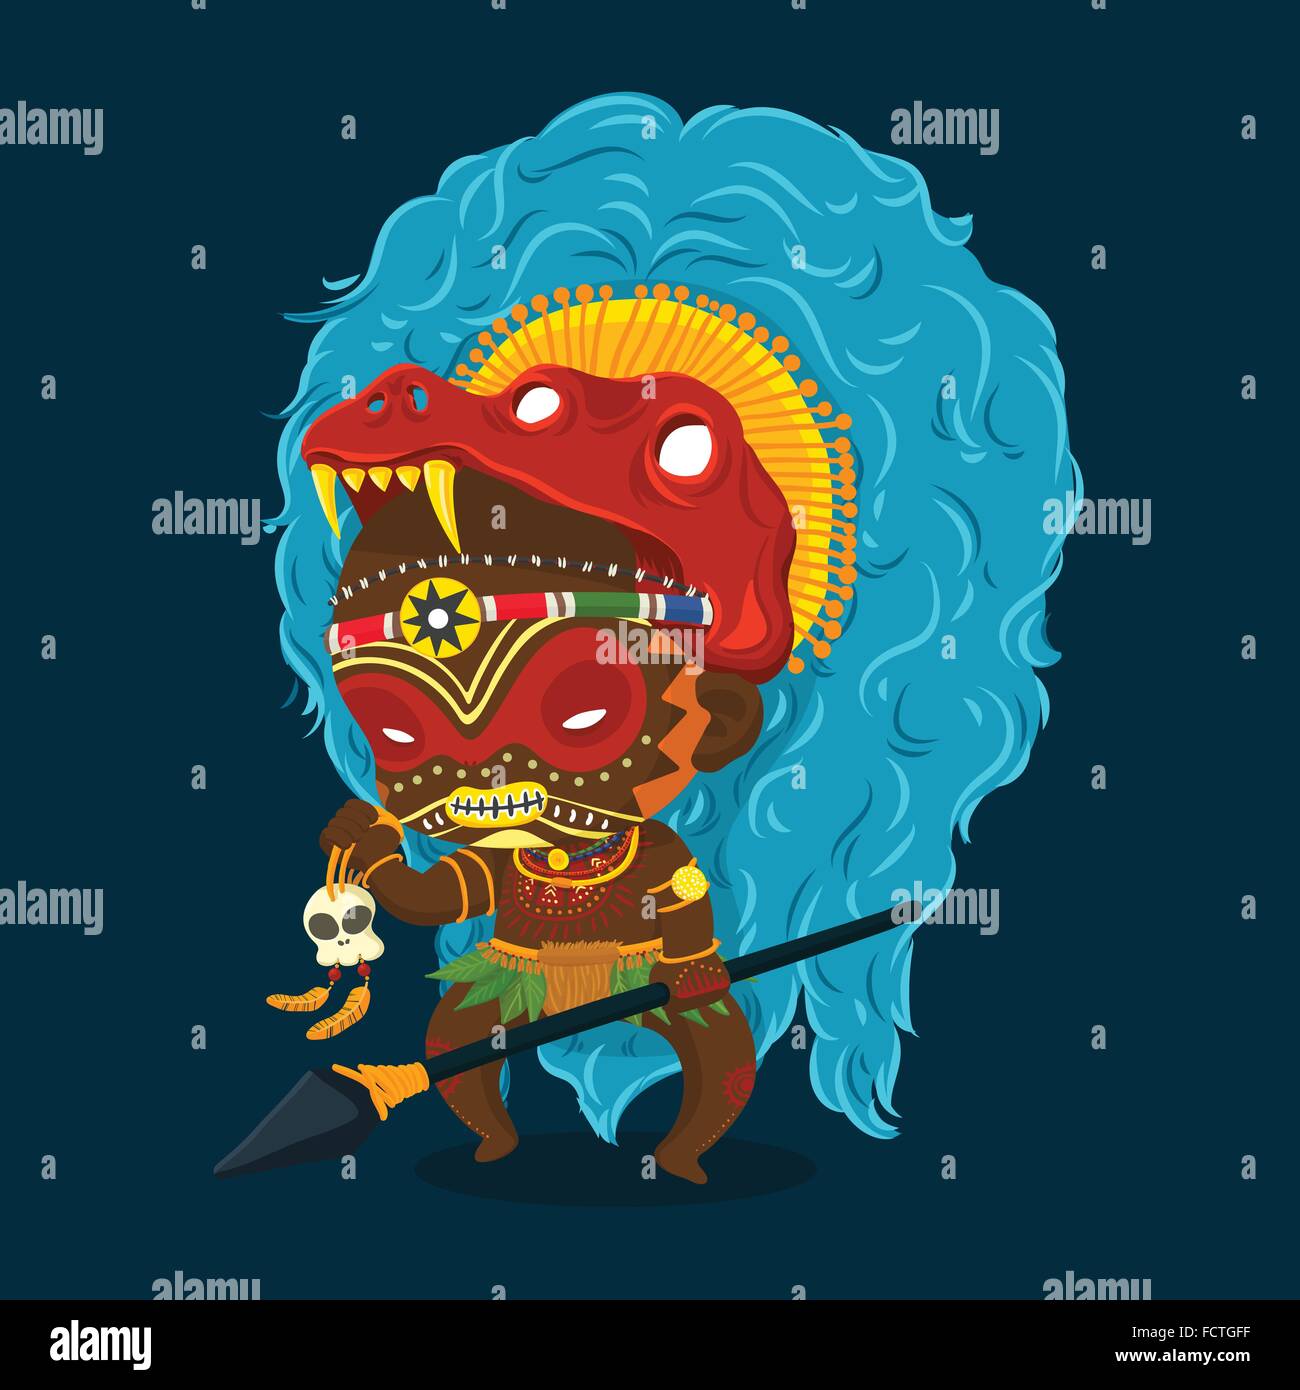 Vector Illustration of African Tribe Shaman with Spear and Skull Cartoon Character Stock Vector